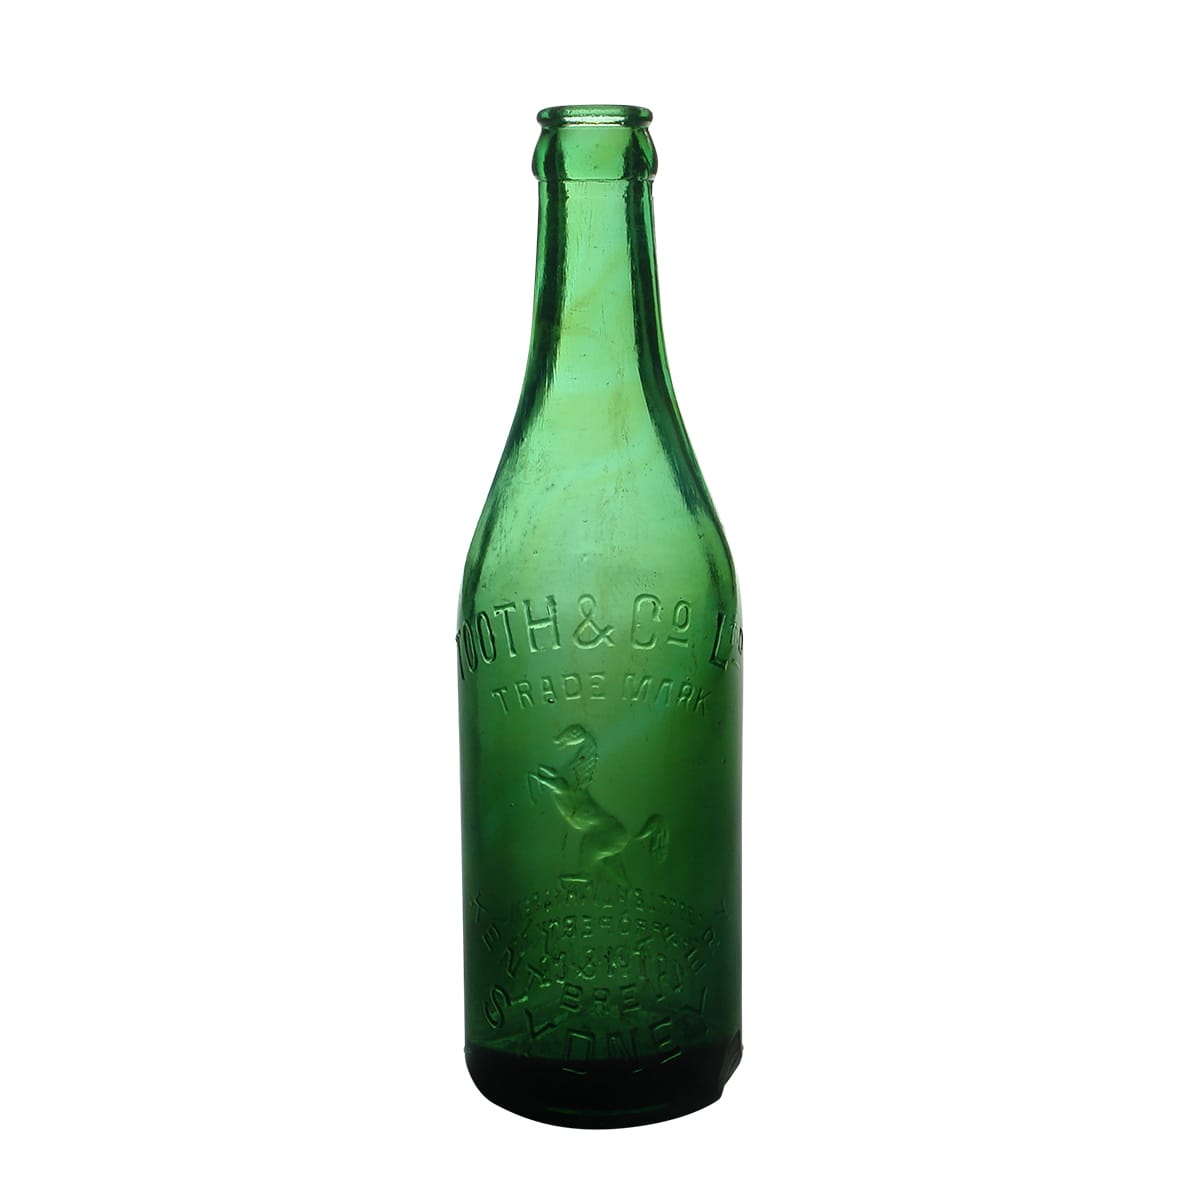 Crown Seal. Tooth & Co Ltd, Sydney. Champagne. Green. 10 oz. (New South Wales)